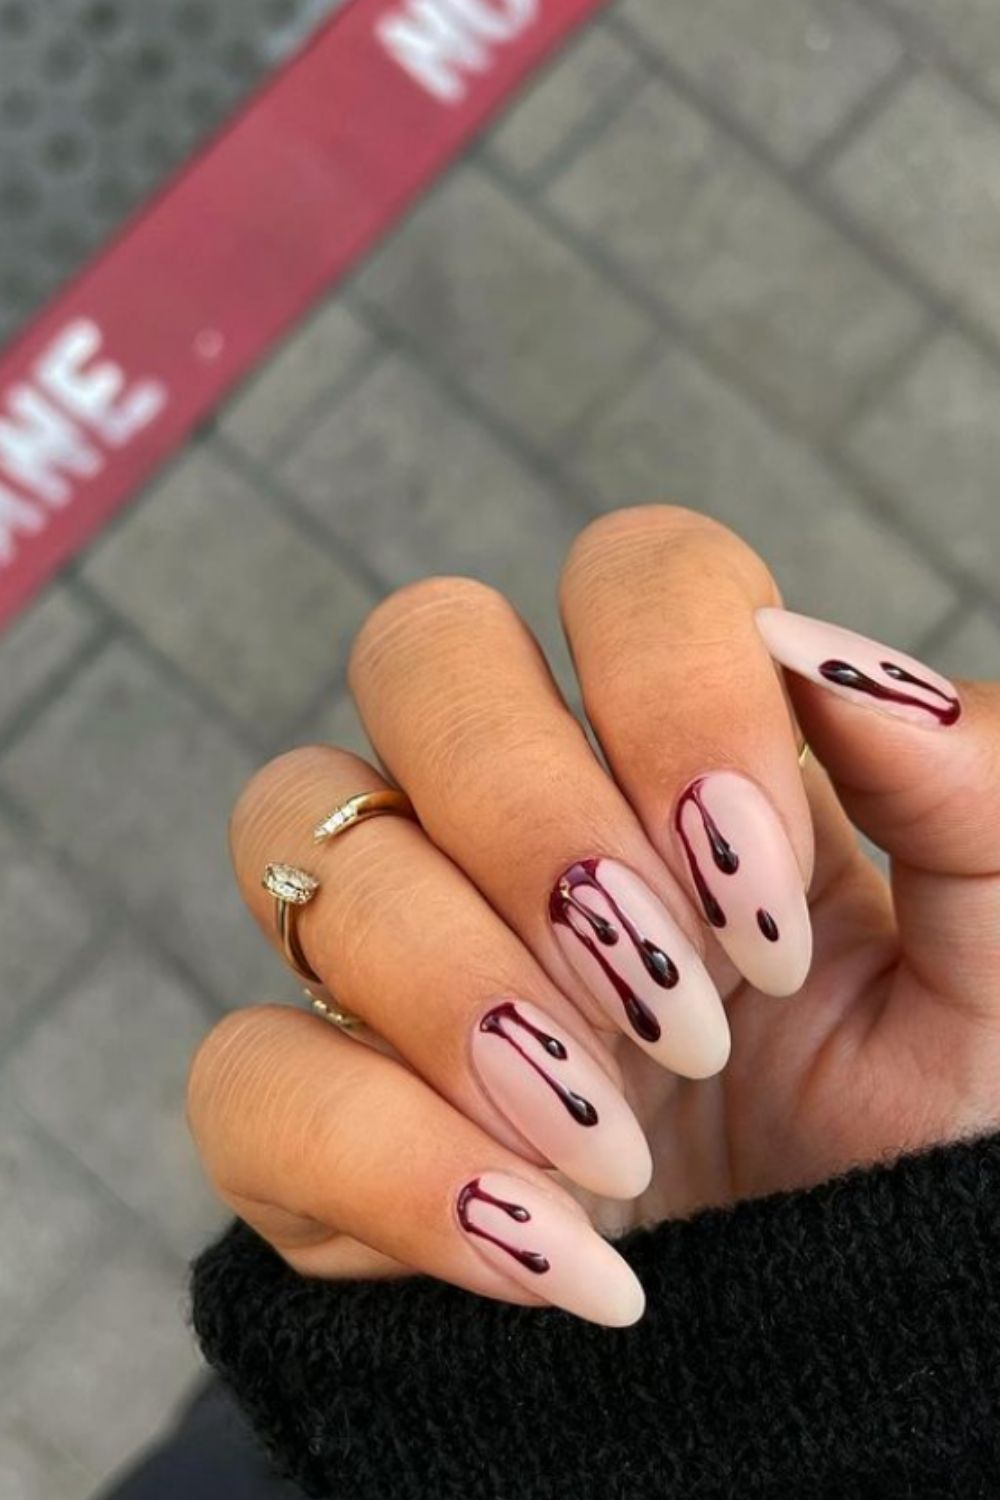 Almond nail design with blood drops